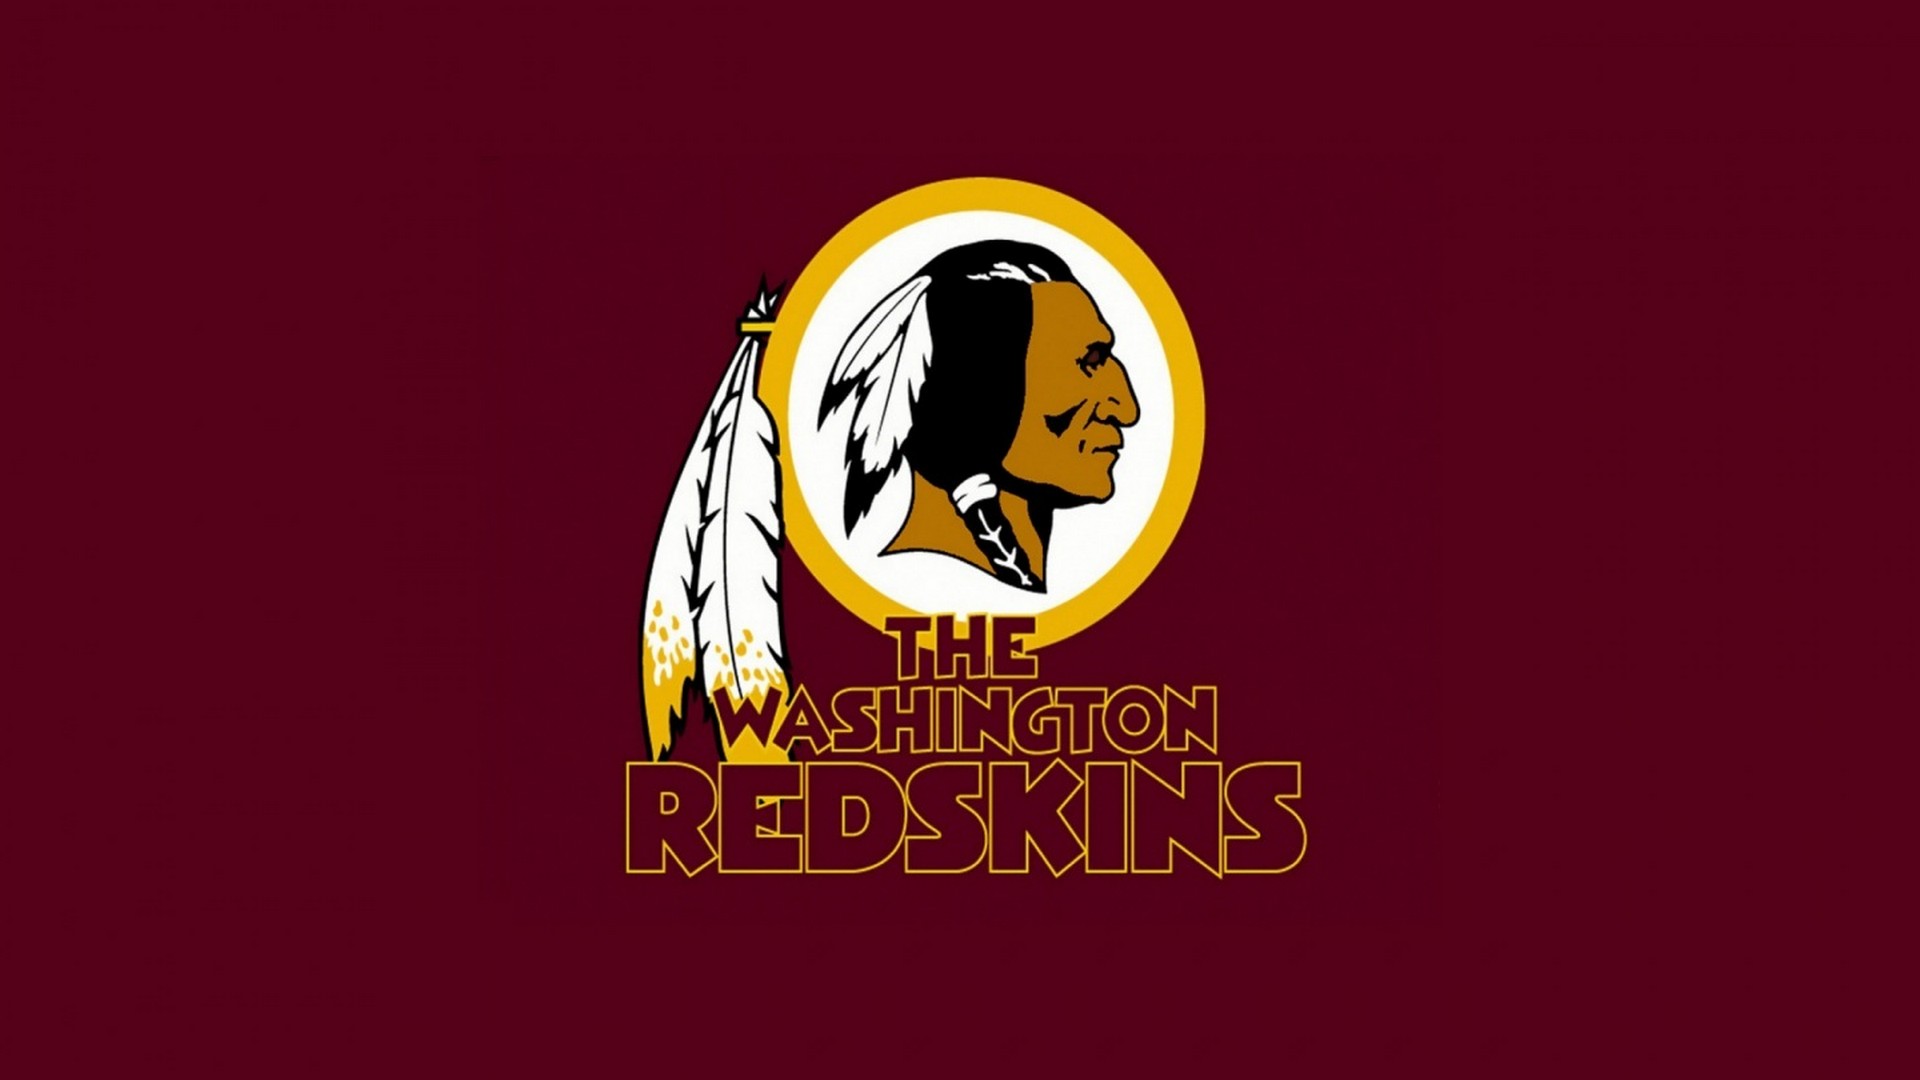 Wallpaper Desktop Washington Redskins HD with high-resolution 1920x1080 pixel. You can use this wallpaper for your Mac or Windows Desktop Background, iPhone, Android or Tablet and another Smartphone device